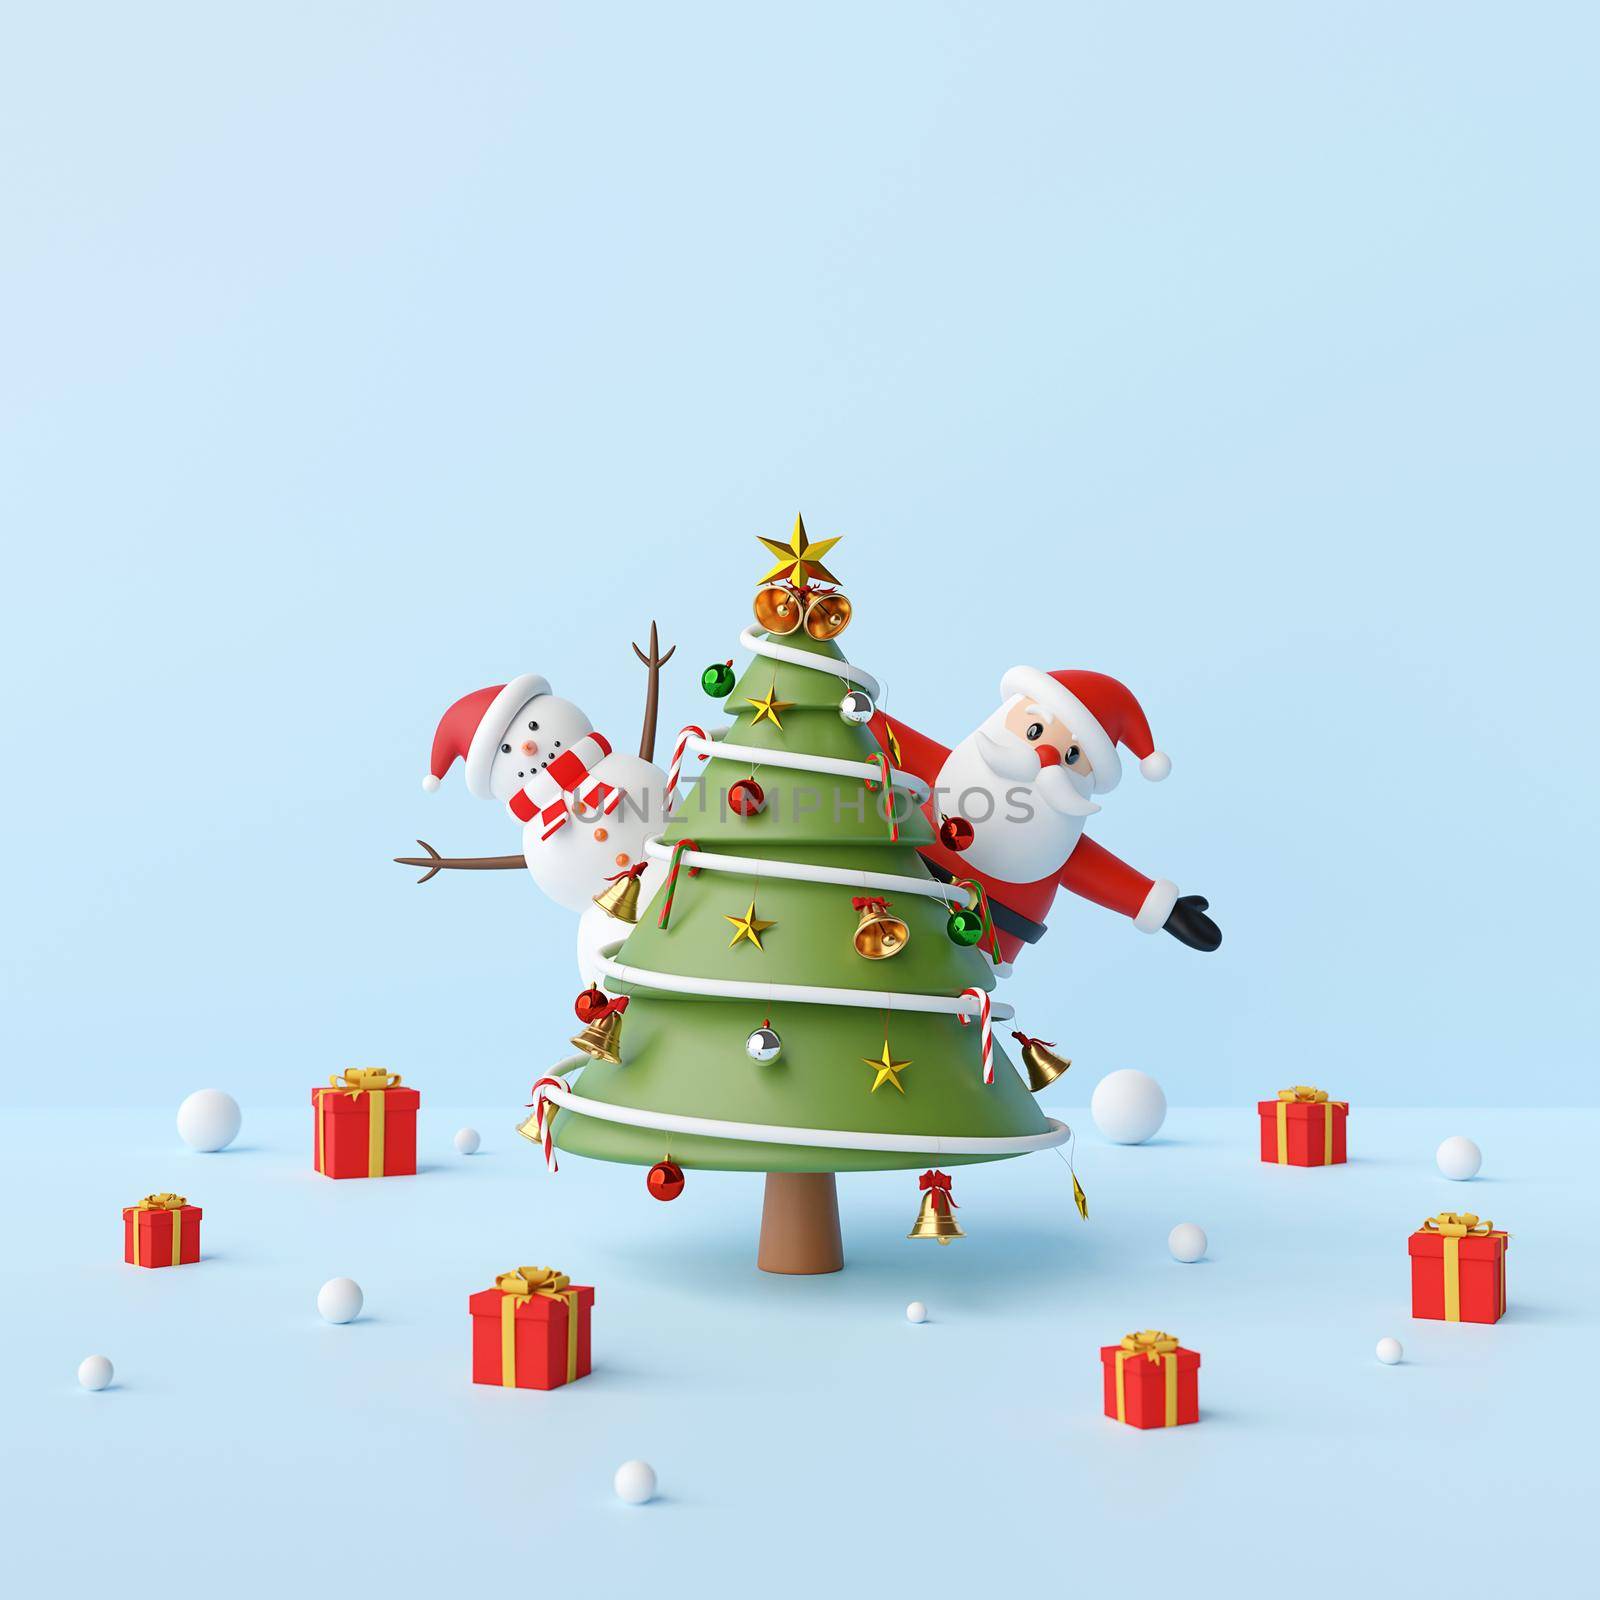 Merry Christmas, Party with Santa Claus, snowman and Christmas tree on a blue background, 3d rendering by nutzchotwarut